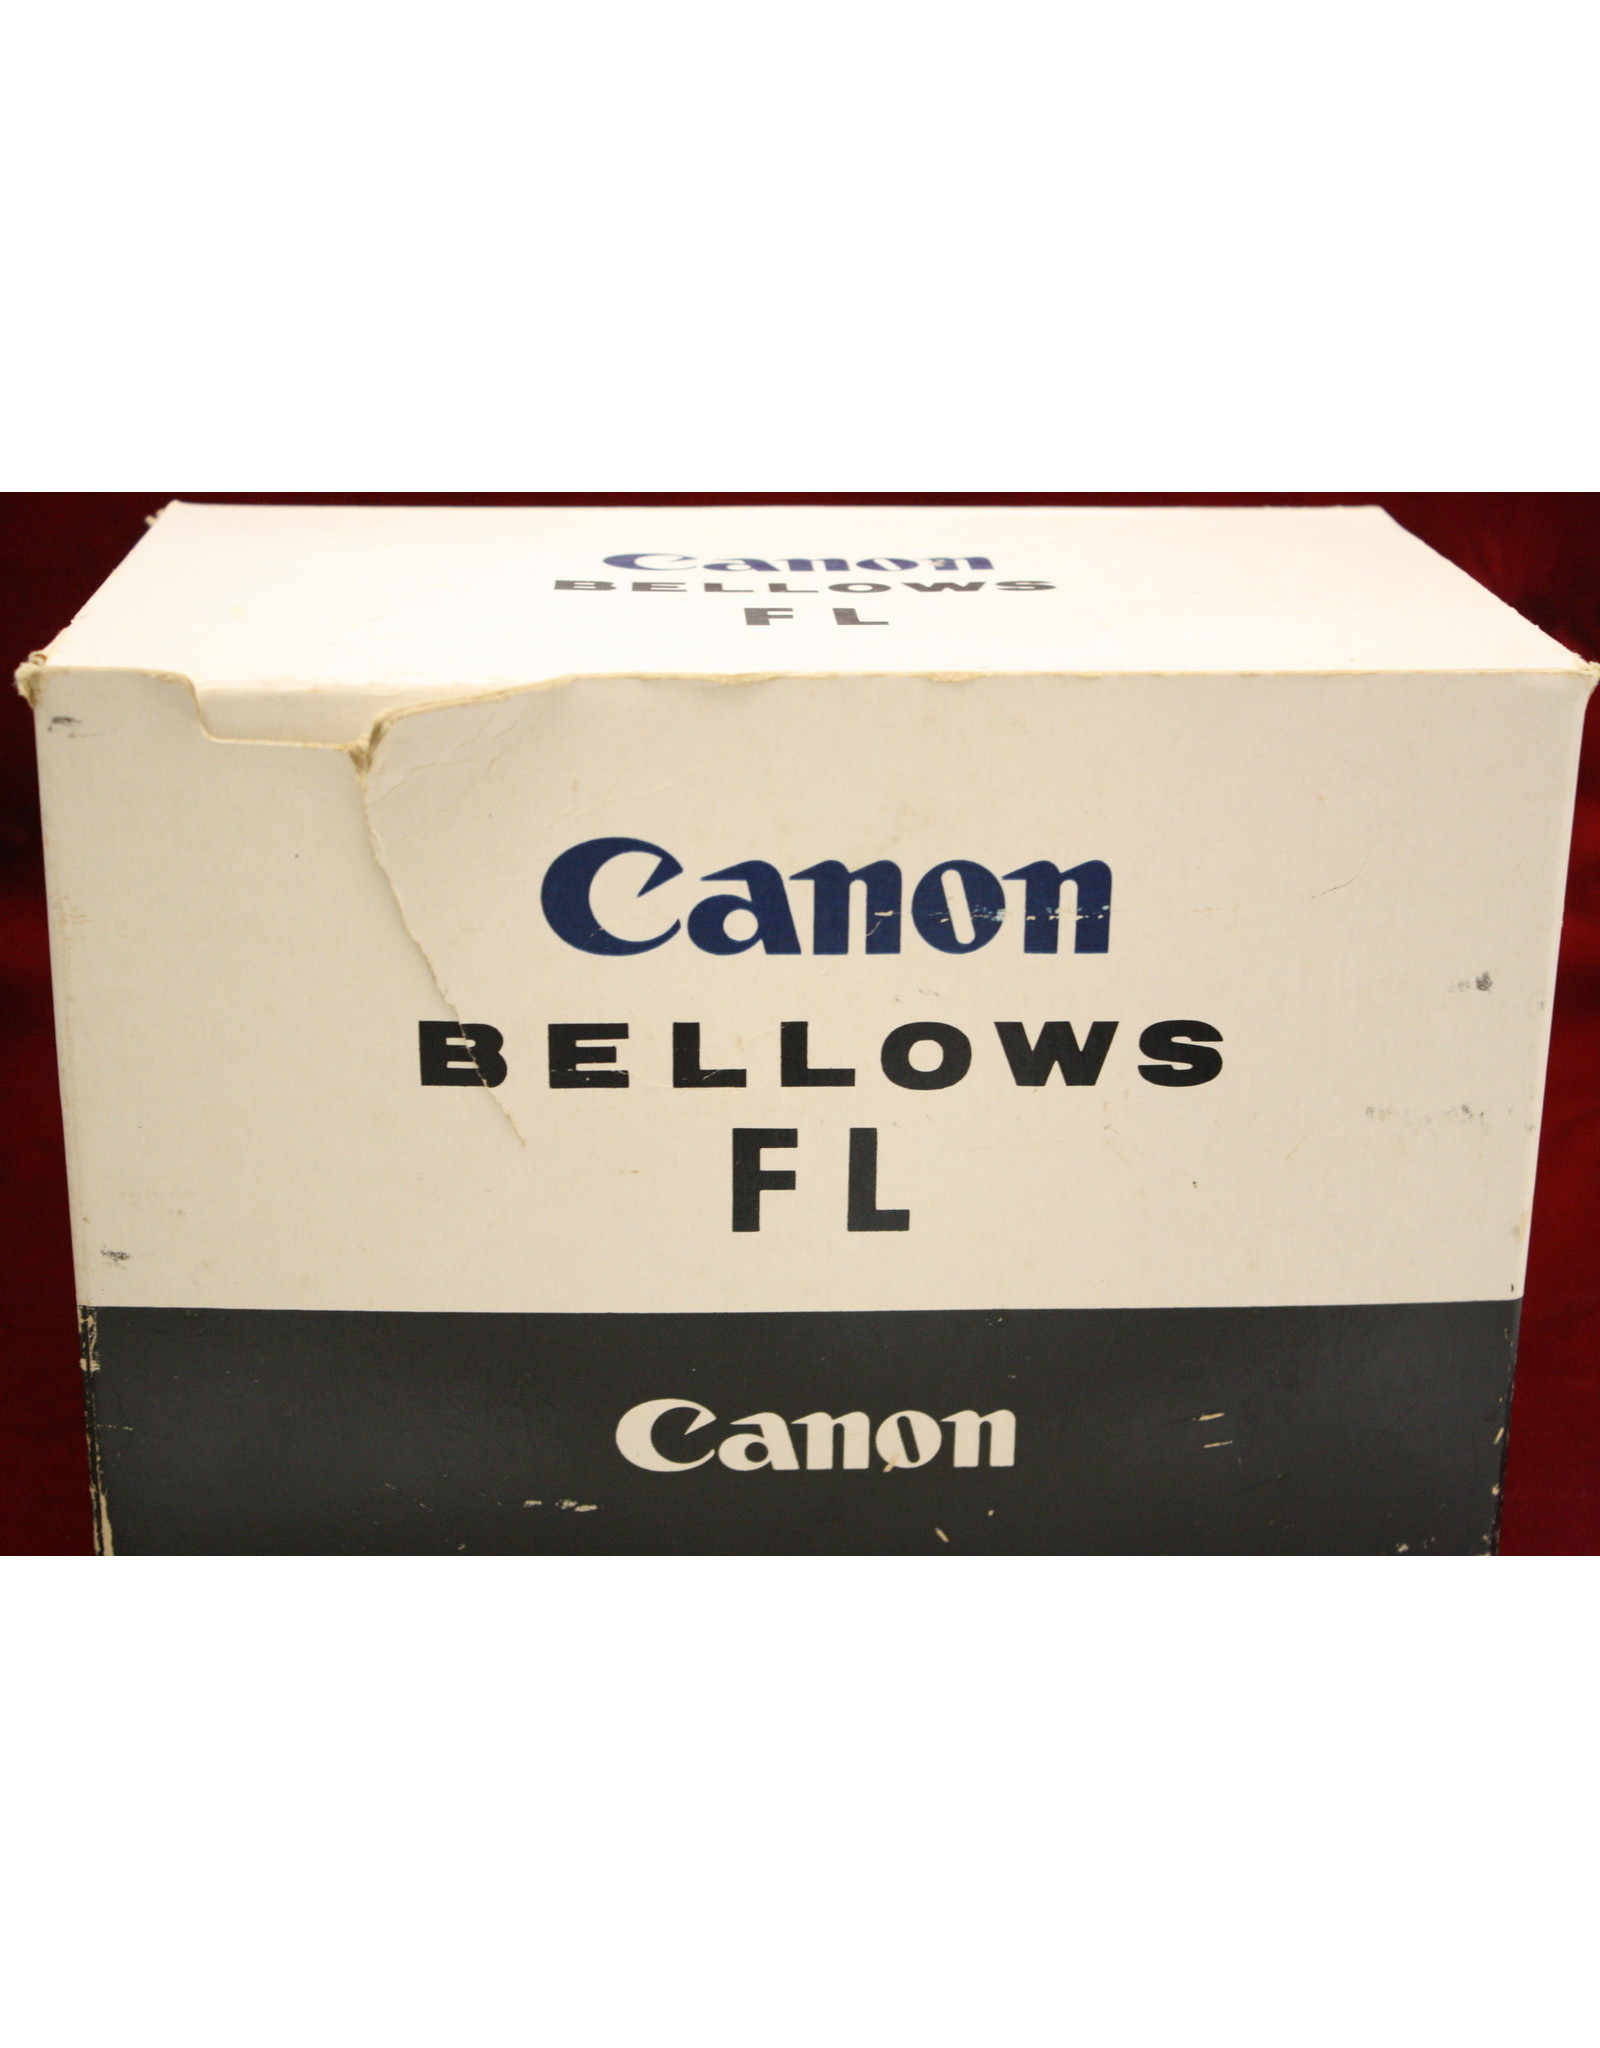 Canon Bellows FL with Original Box and manual (Pre-owned)